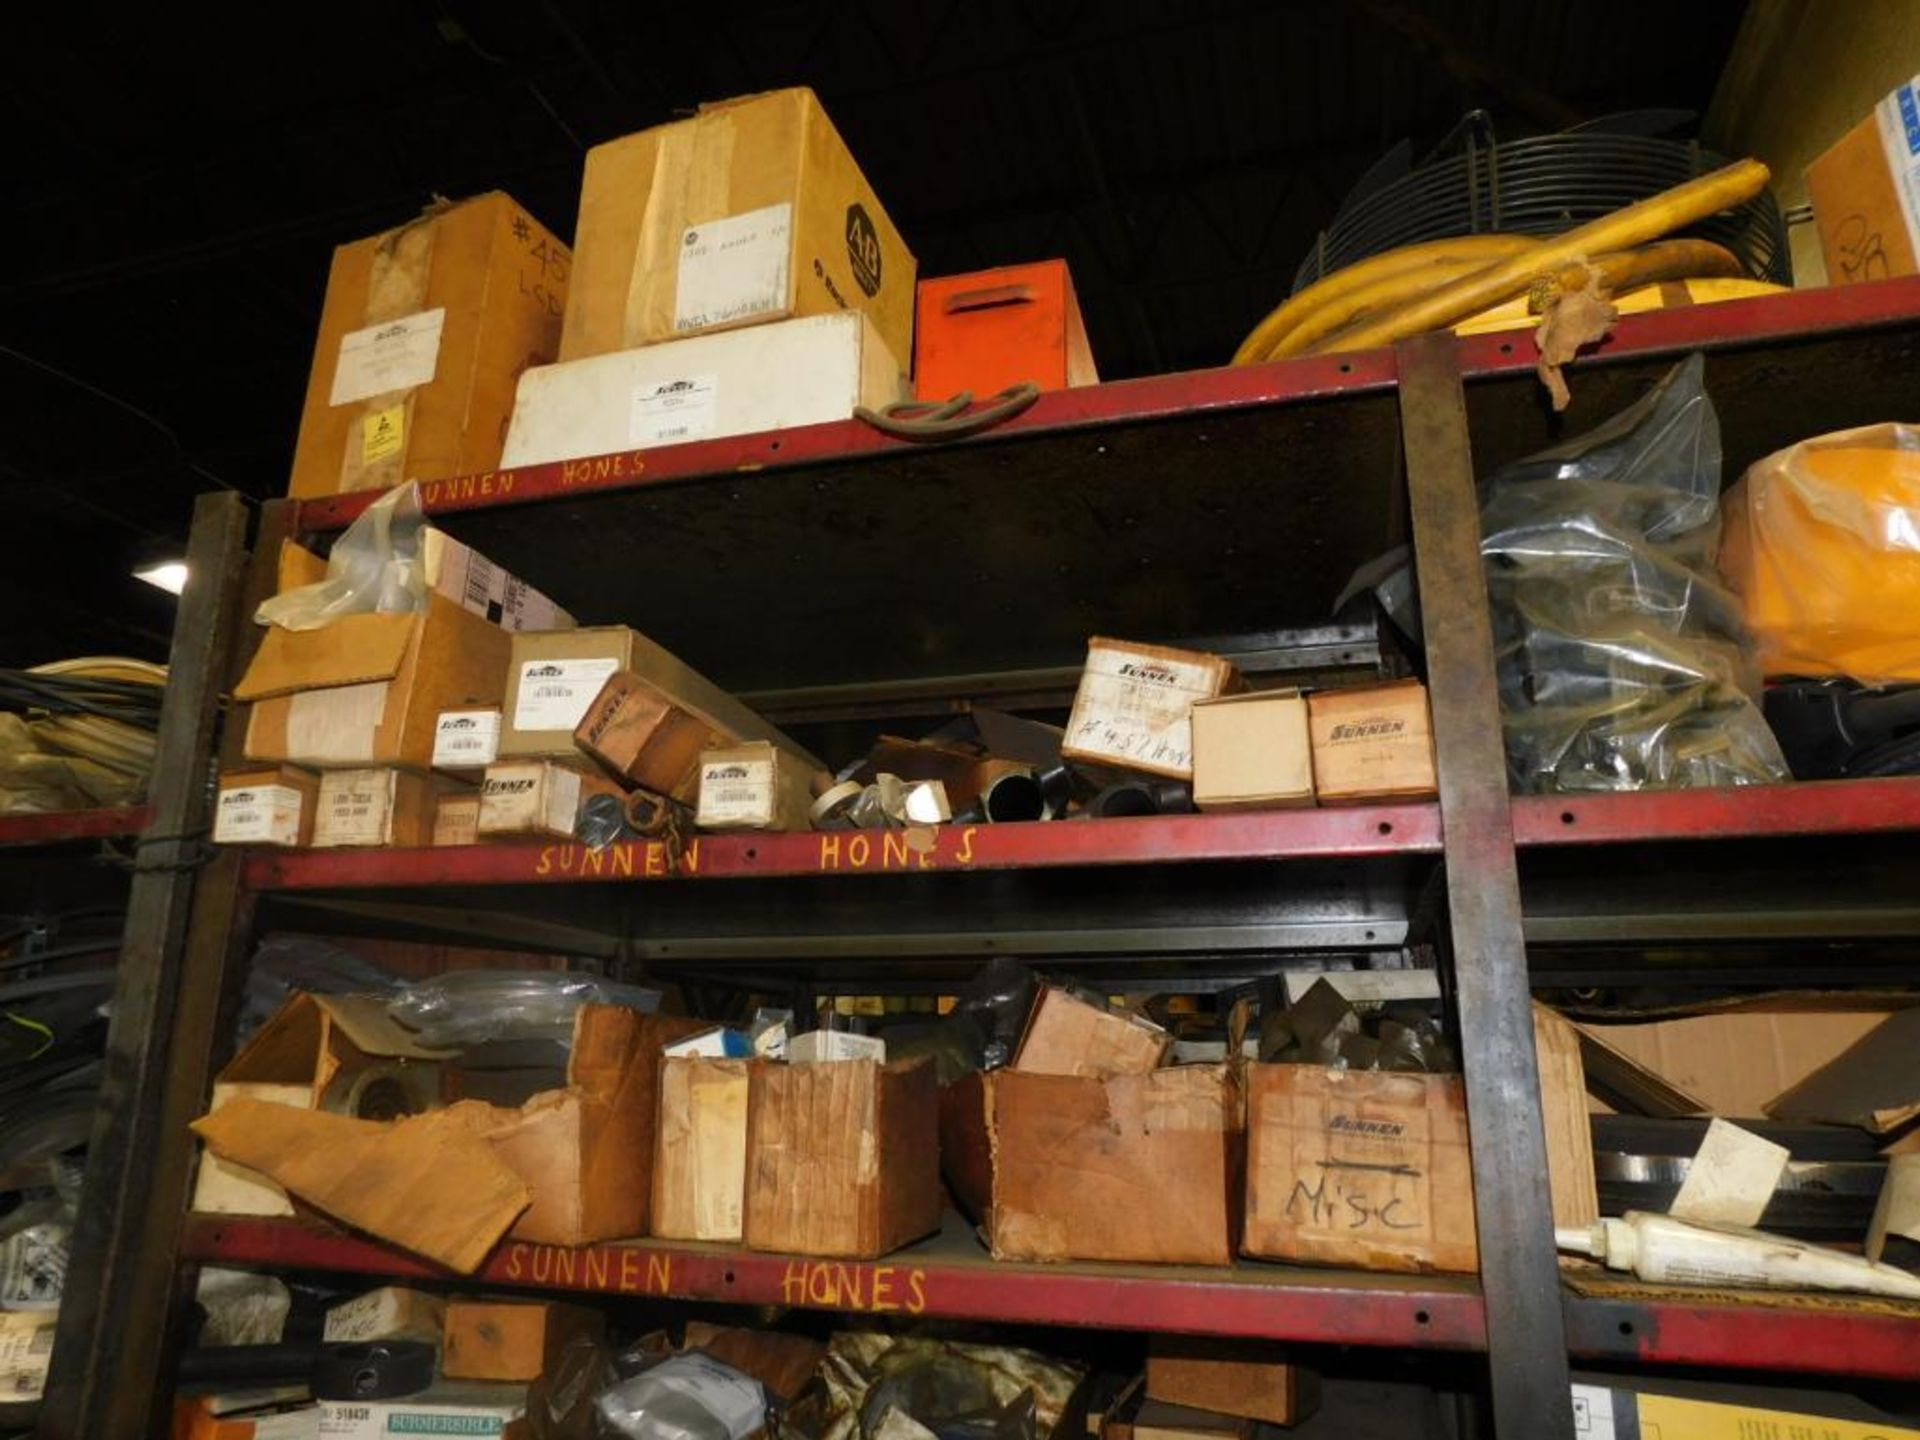 LOT: Contents of Back Maintenance Room: (2) Racks of Contents, Machine Parts, Hosing, Wire, Parts Wa - Image 14 of 16